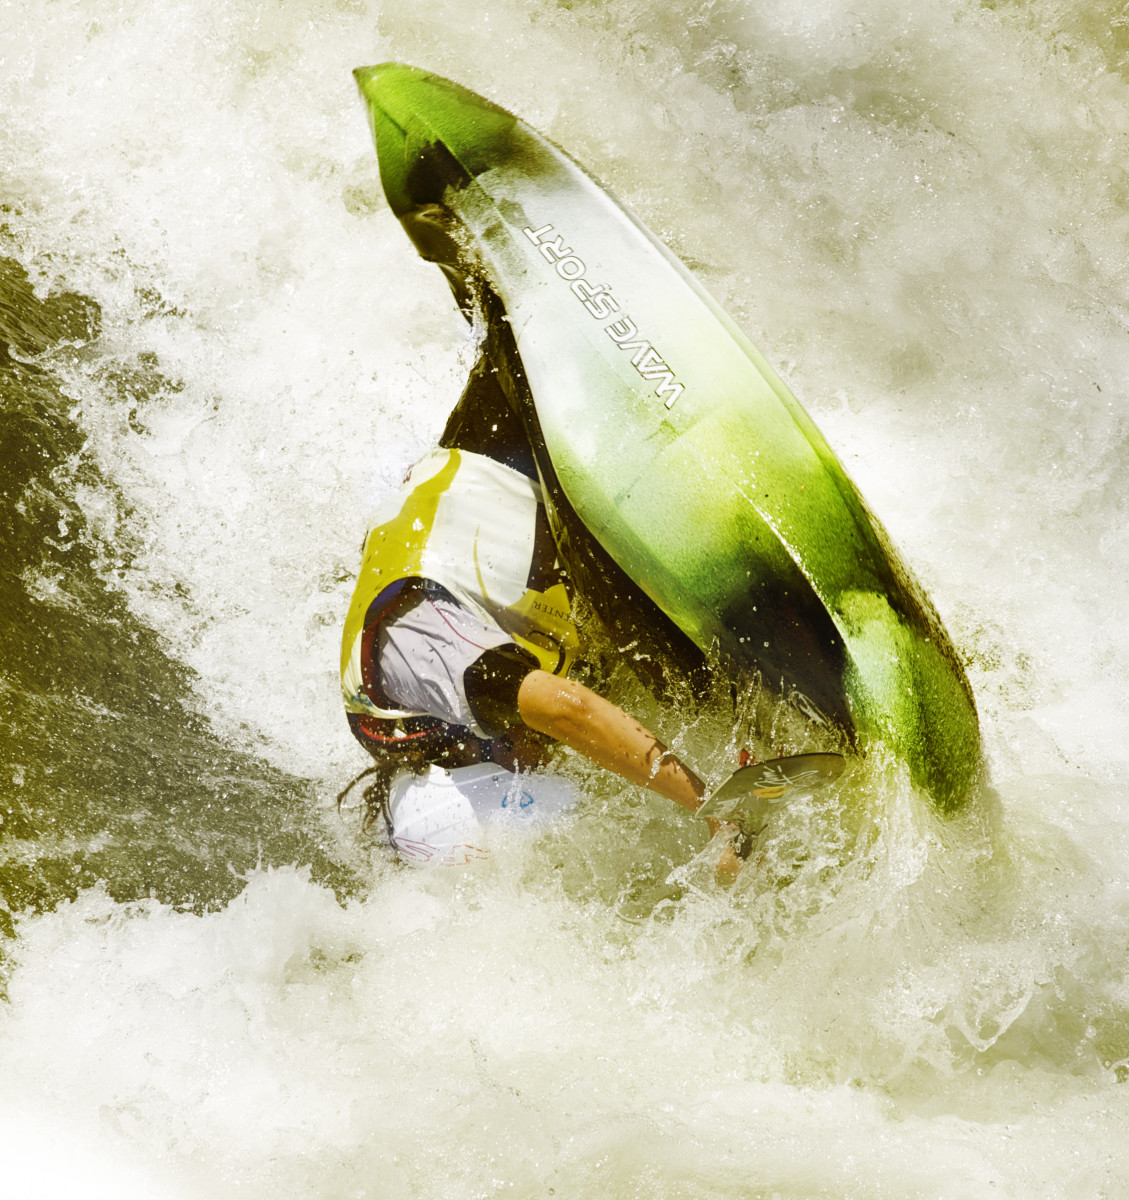 The Mobius excels in the foam pile and on clean waves.